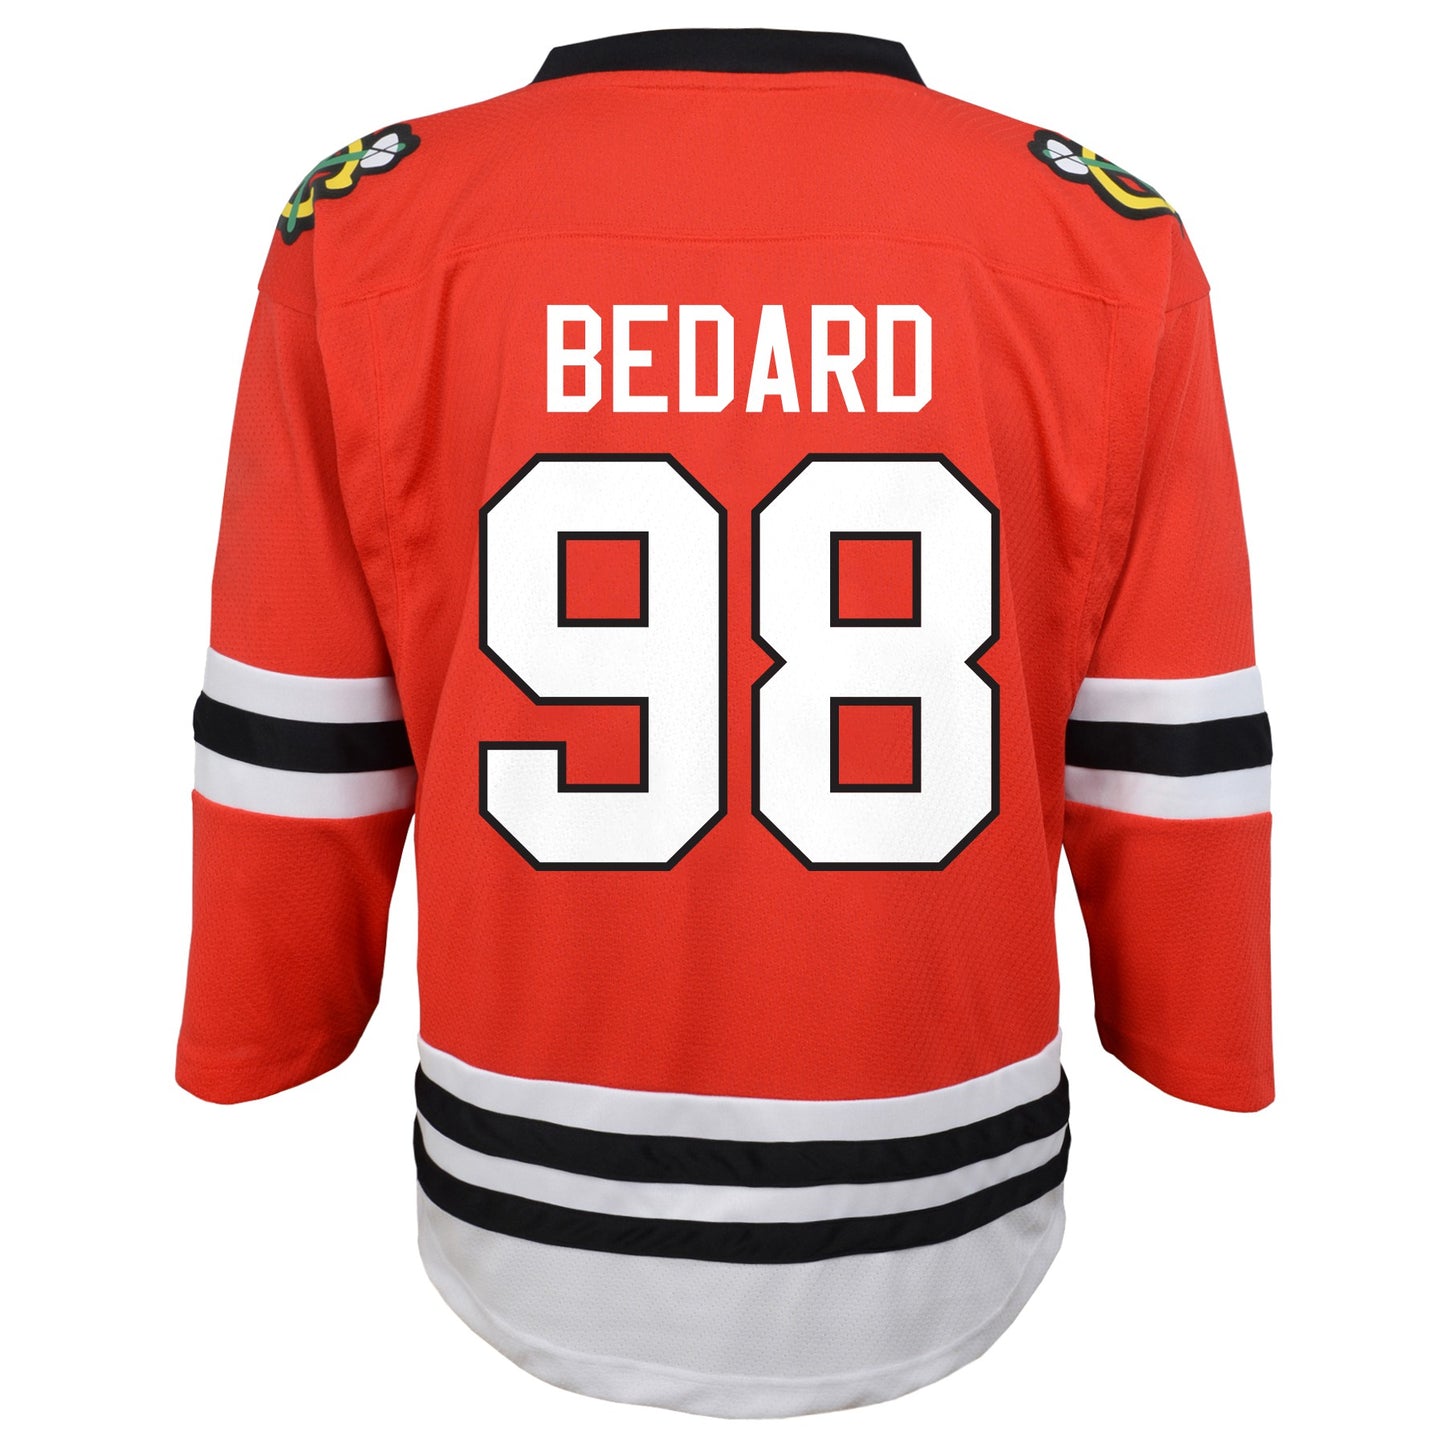 Infant Connor Bedard Chicago Blackhawks Red Home Replica Jersey (12-24 months)